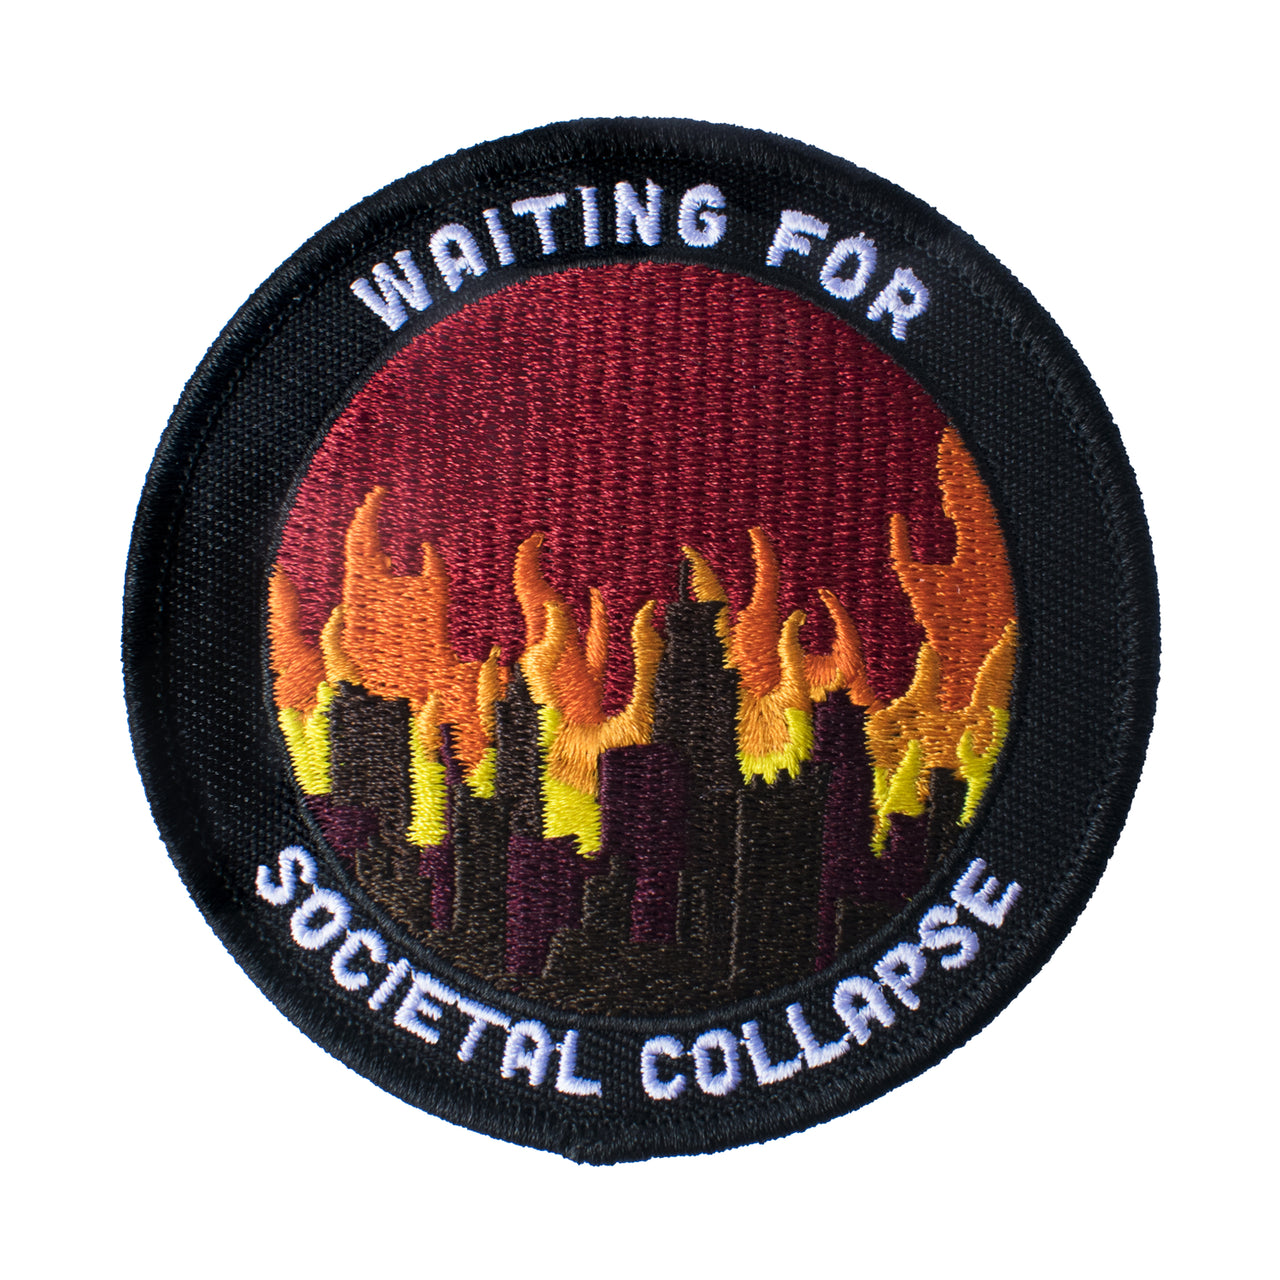 Waiting For Societal Collapse (Hook & Loop Patch)